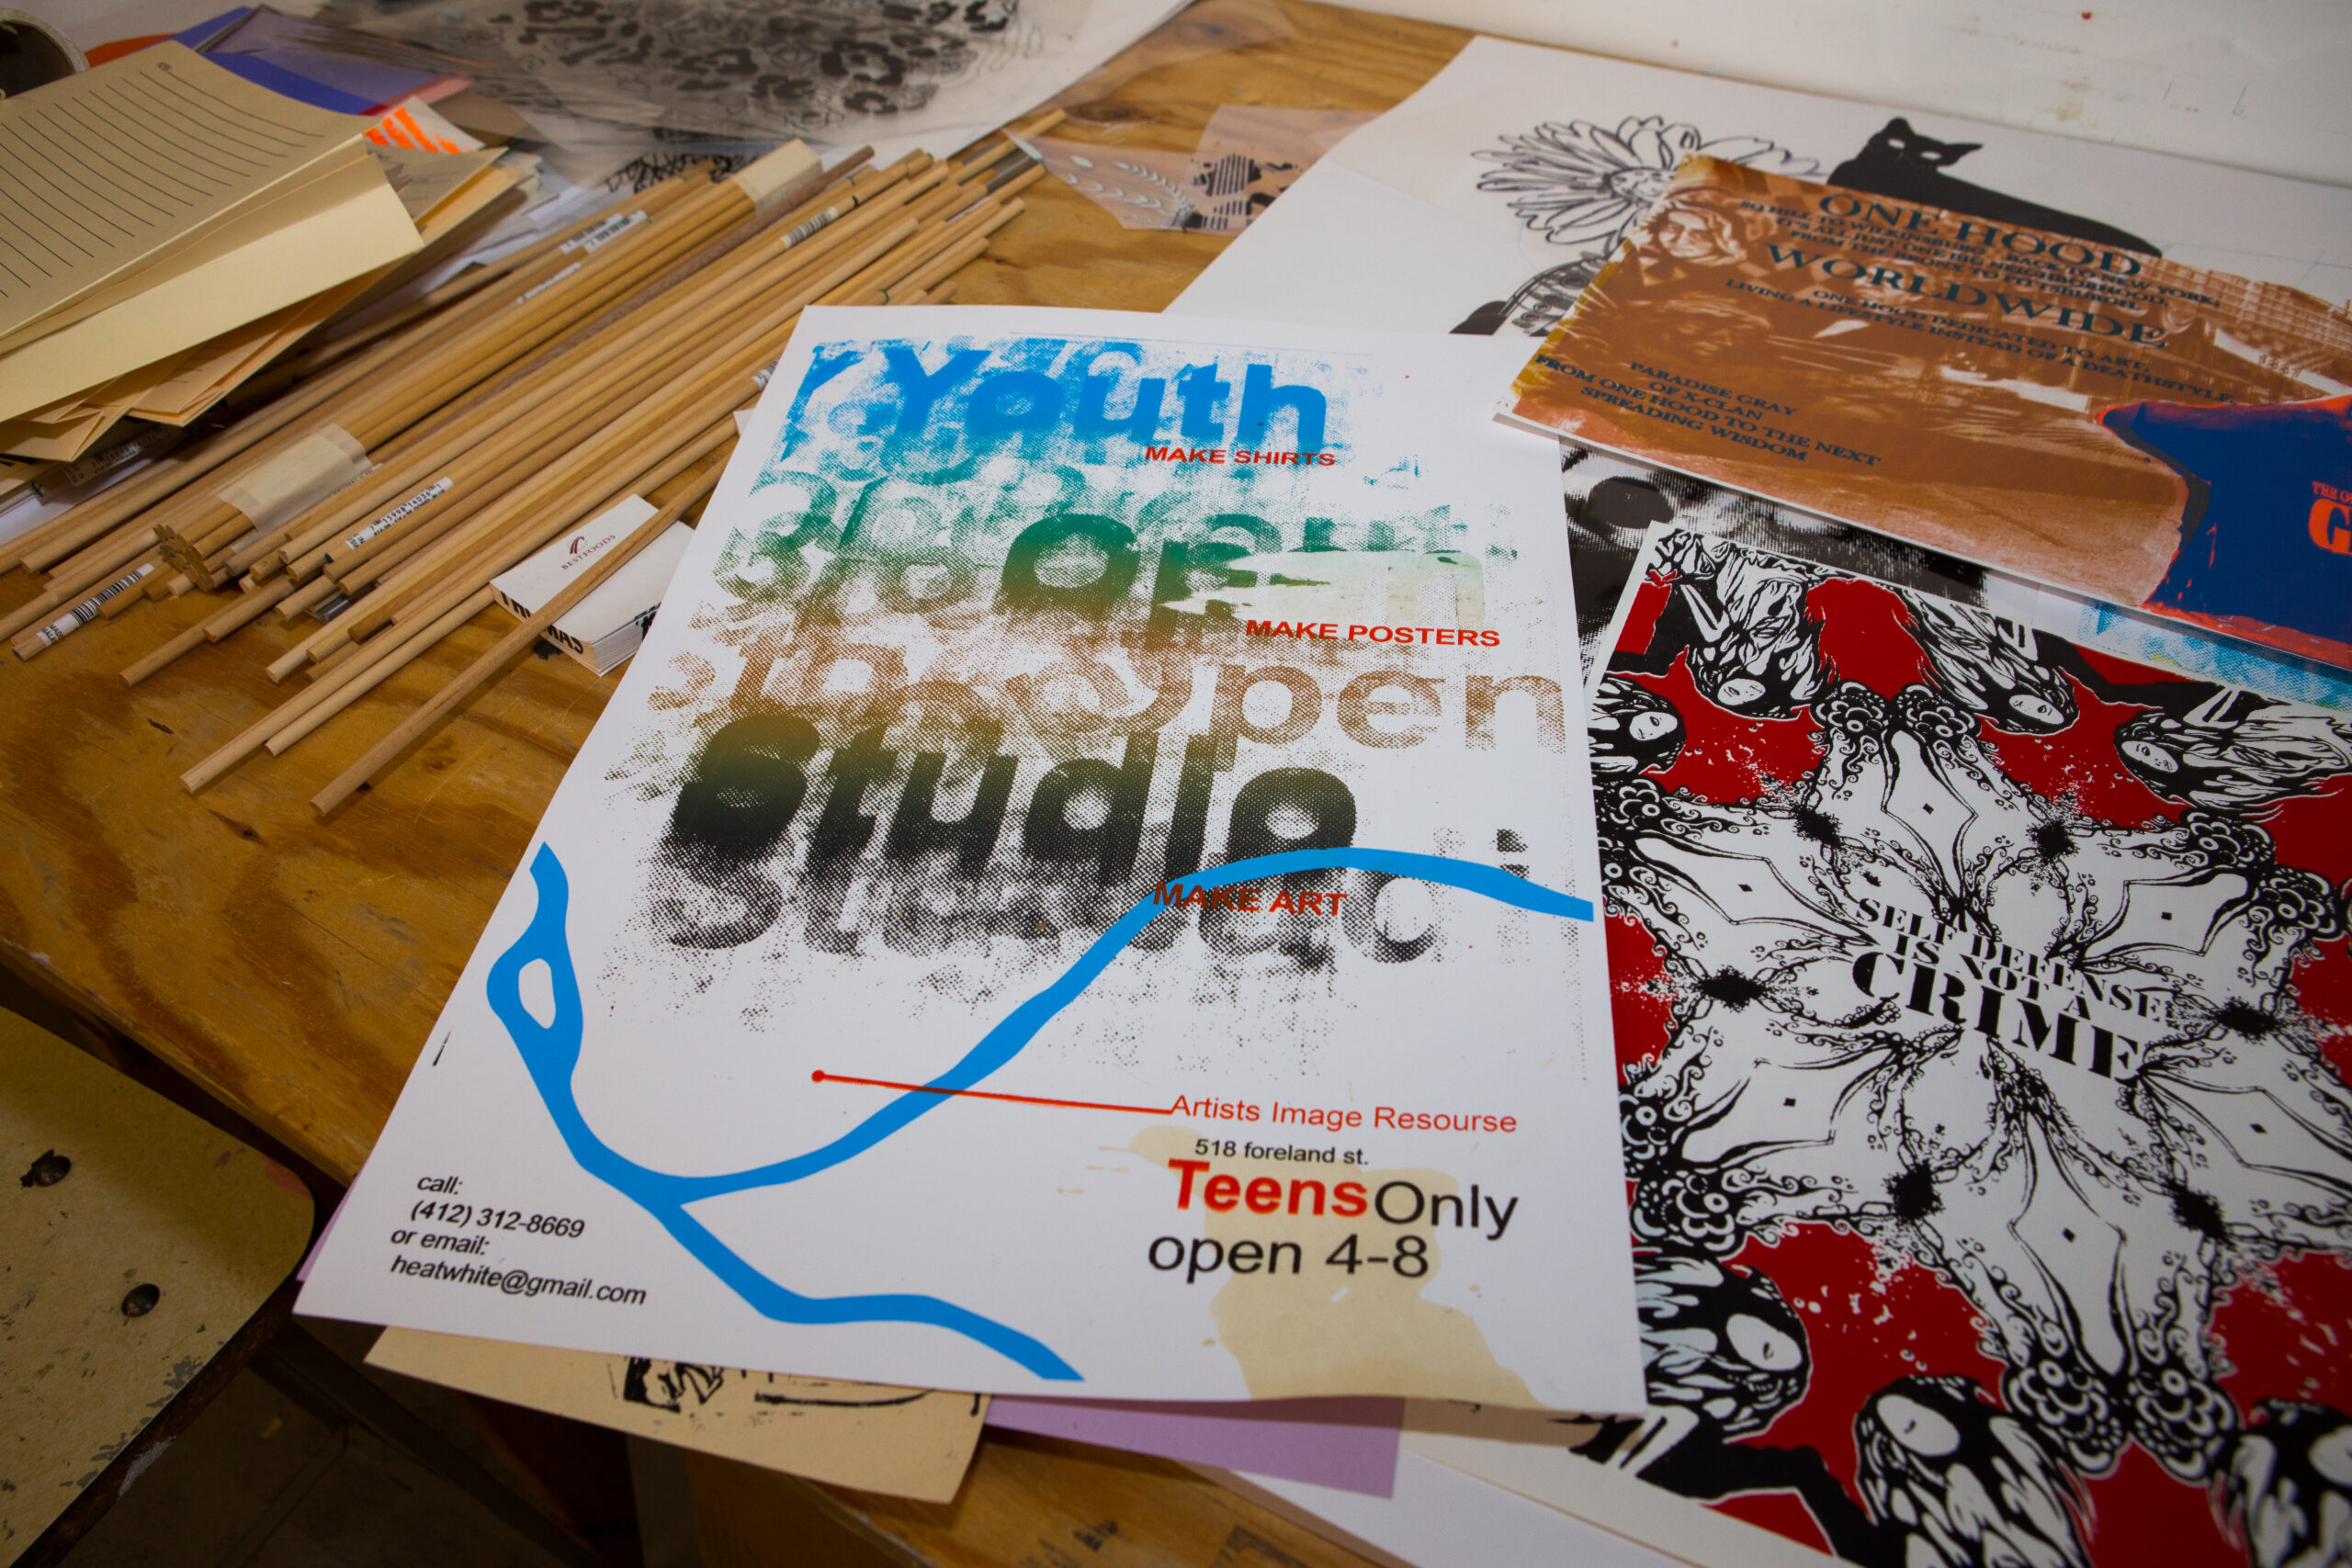 A poster of the Andy Warhol Museum's Youth Open Studio sits on a table with other posters and art supplies.